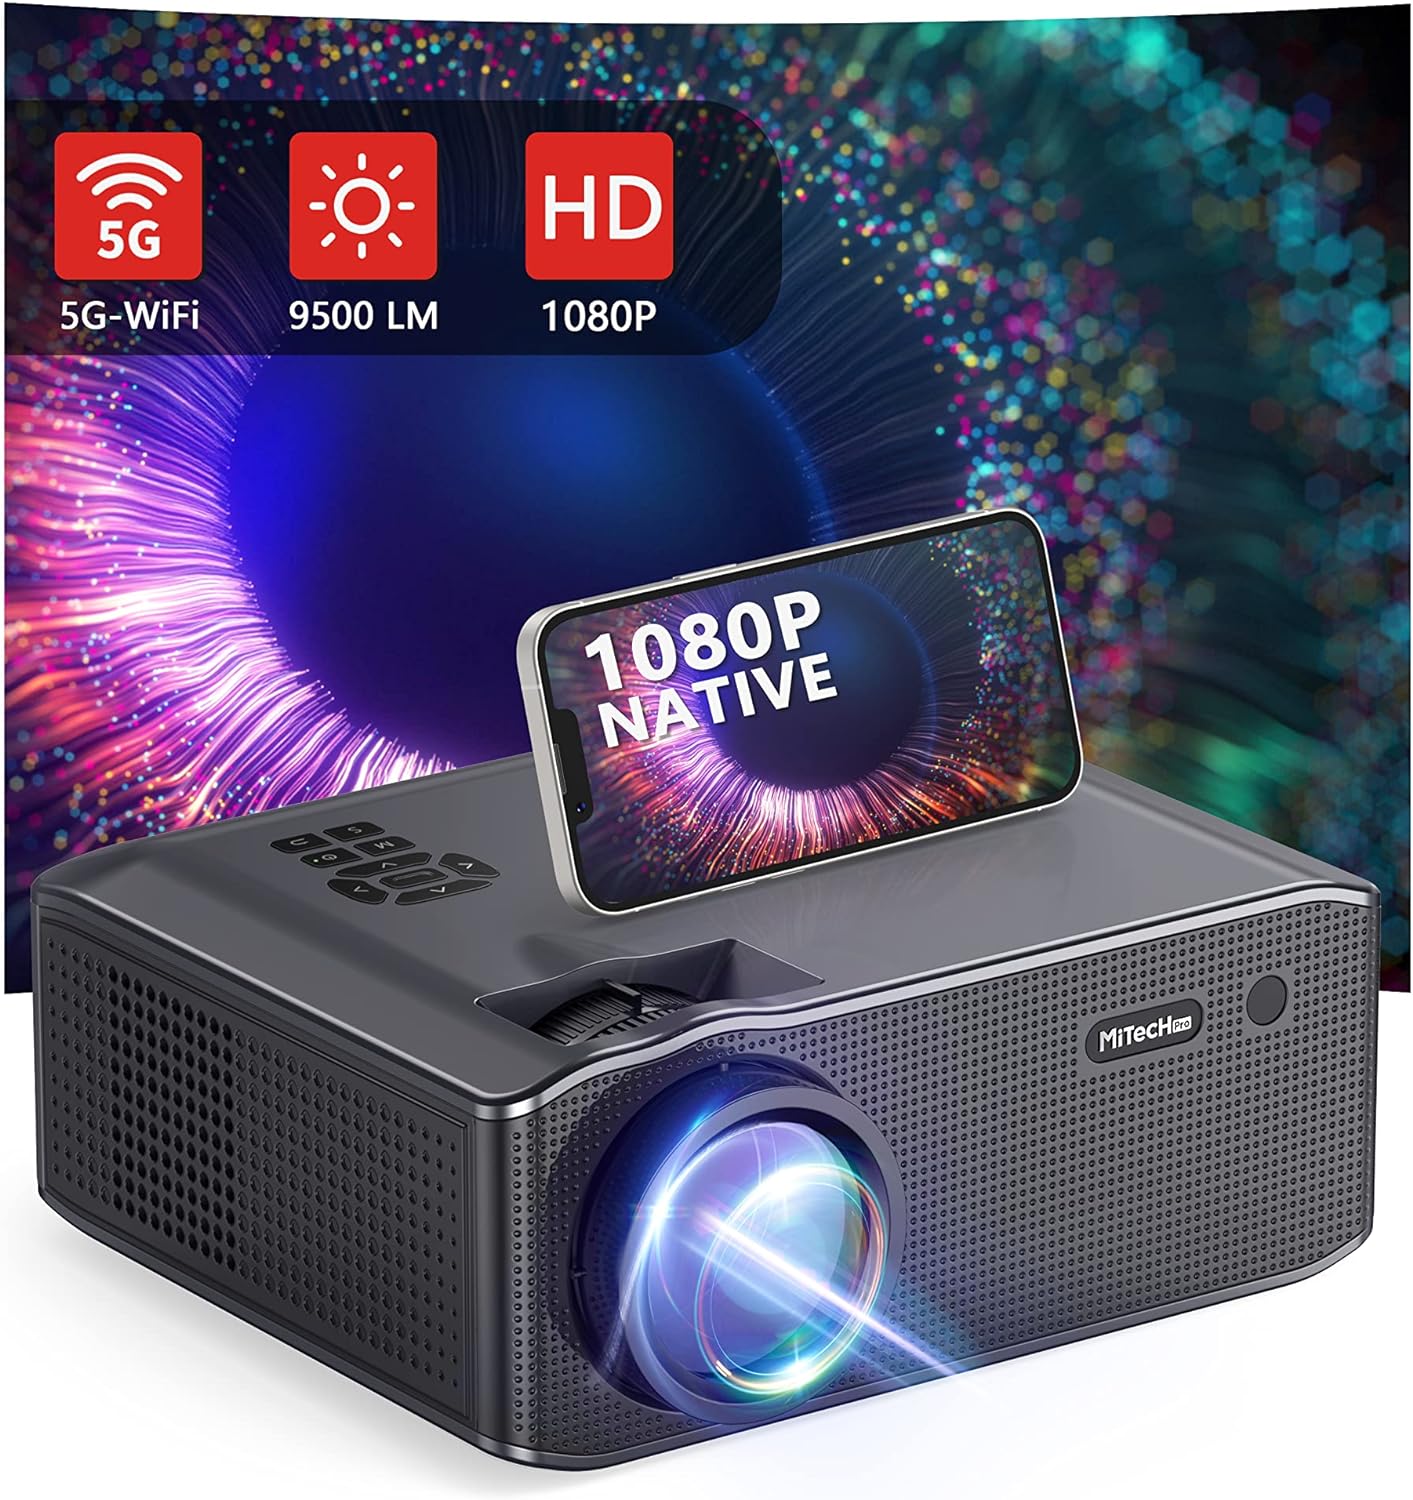 TaoTronics Projector 4K with WiFi and Bluetooth Supported, MiTecHPro 4